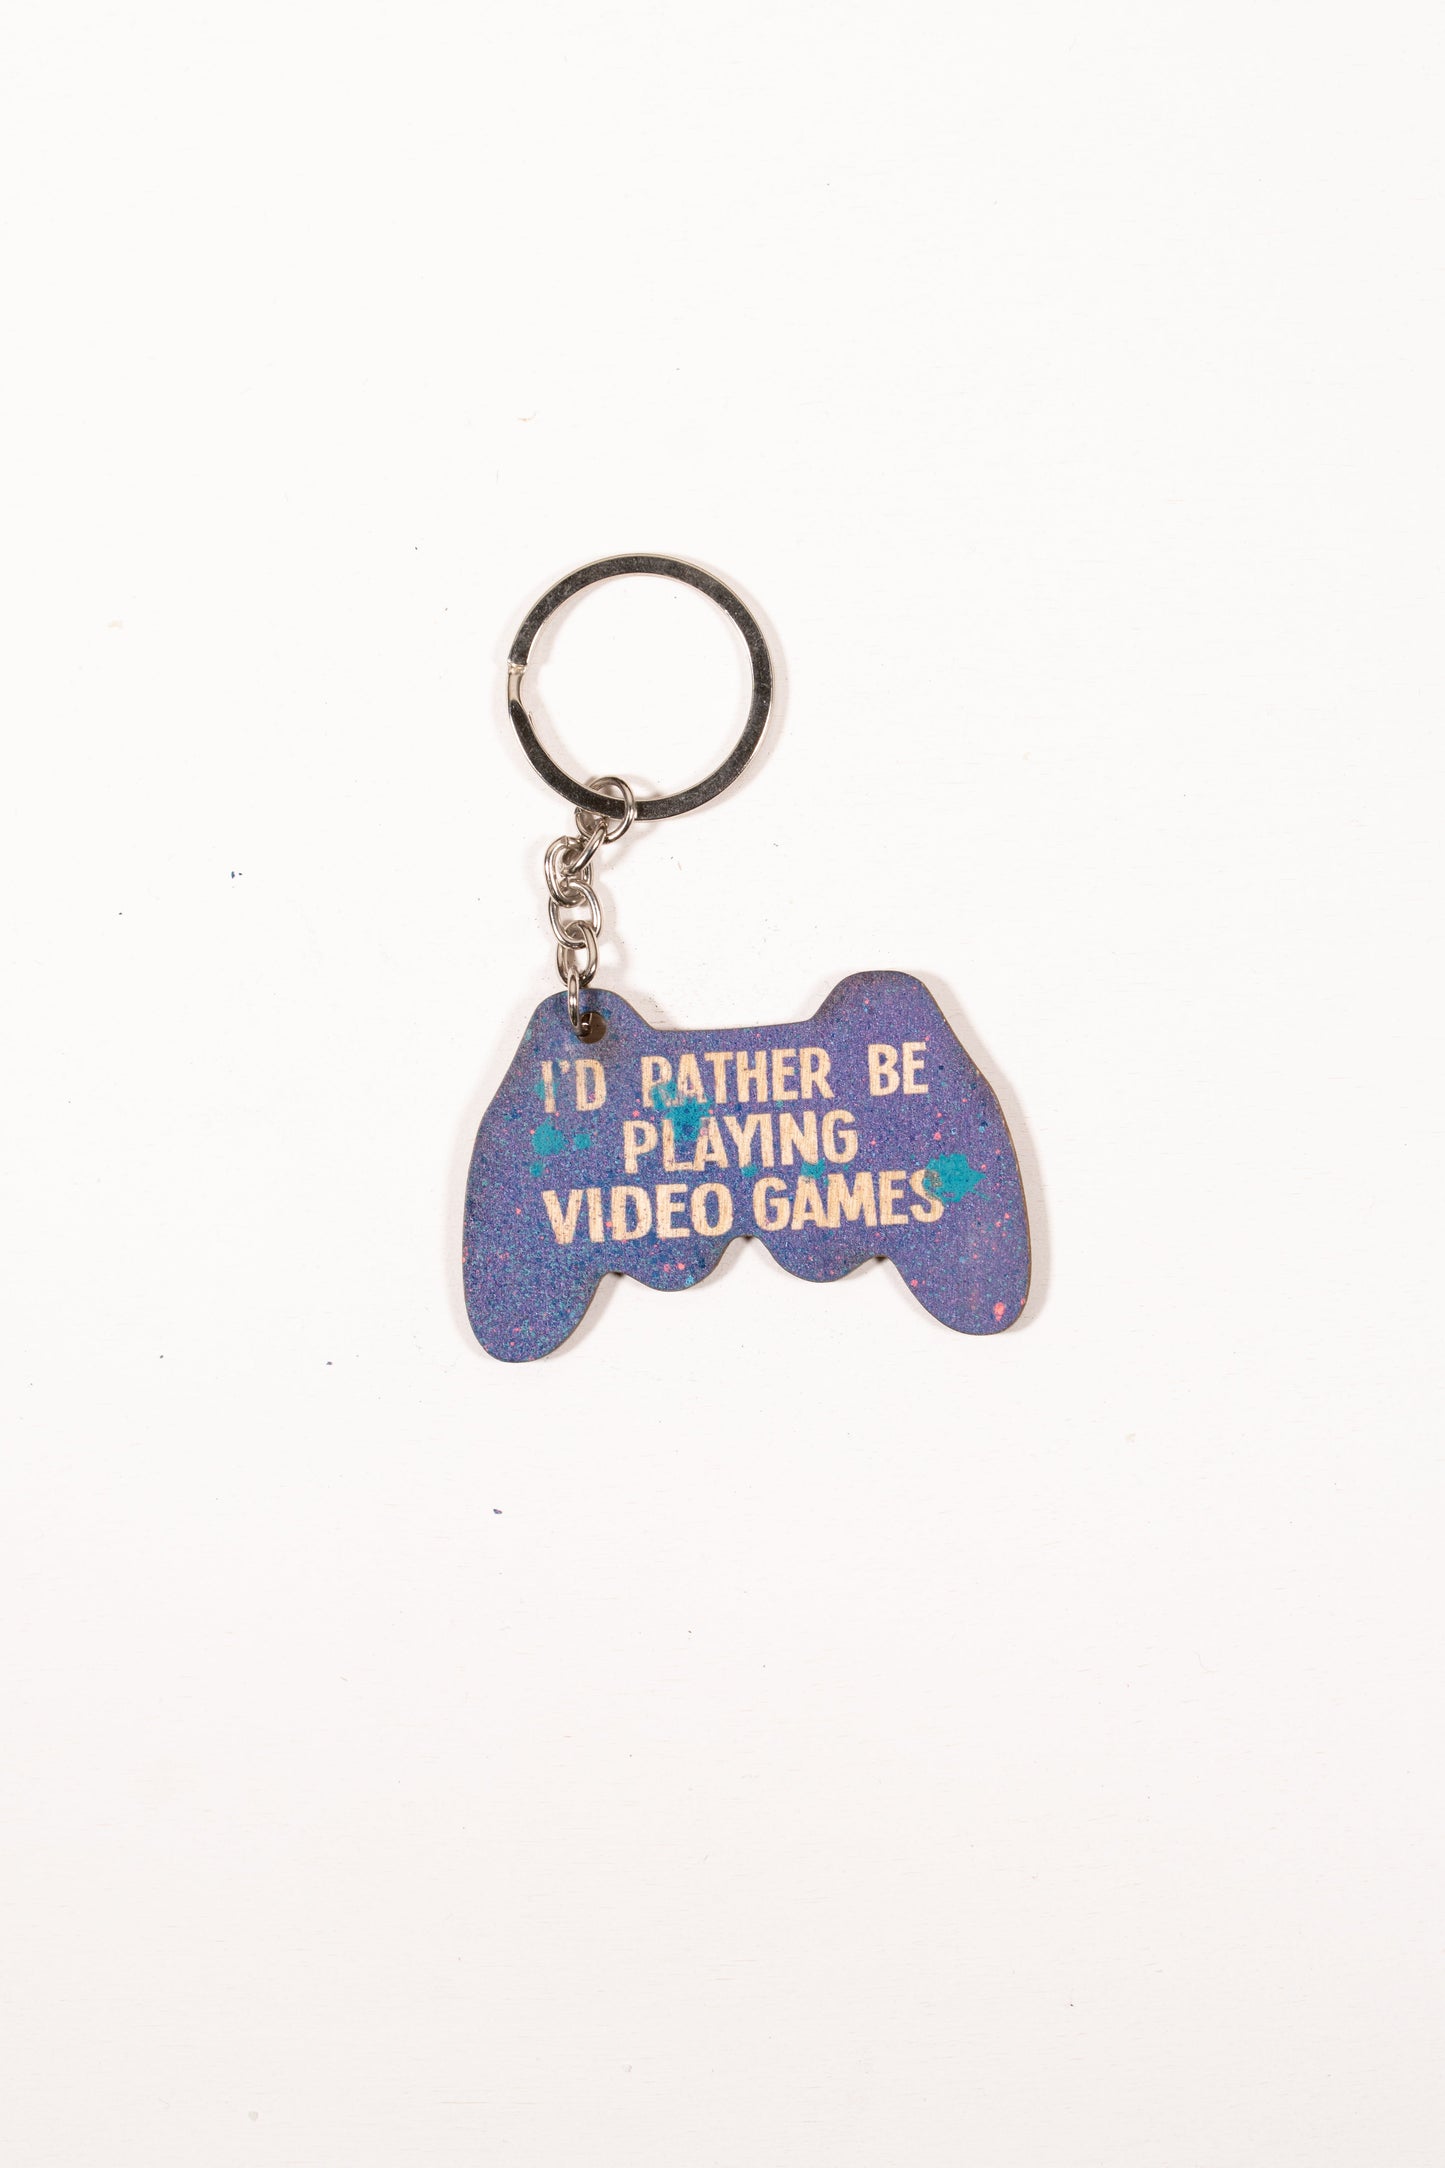 "I'd Rather Be Playing Video Games" Keychain